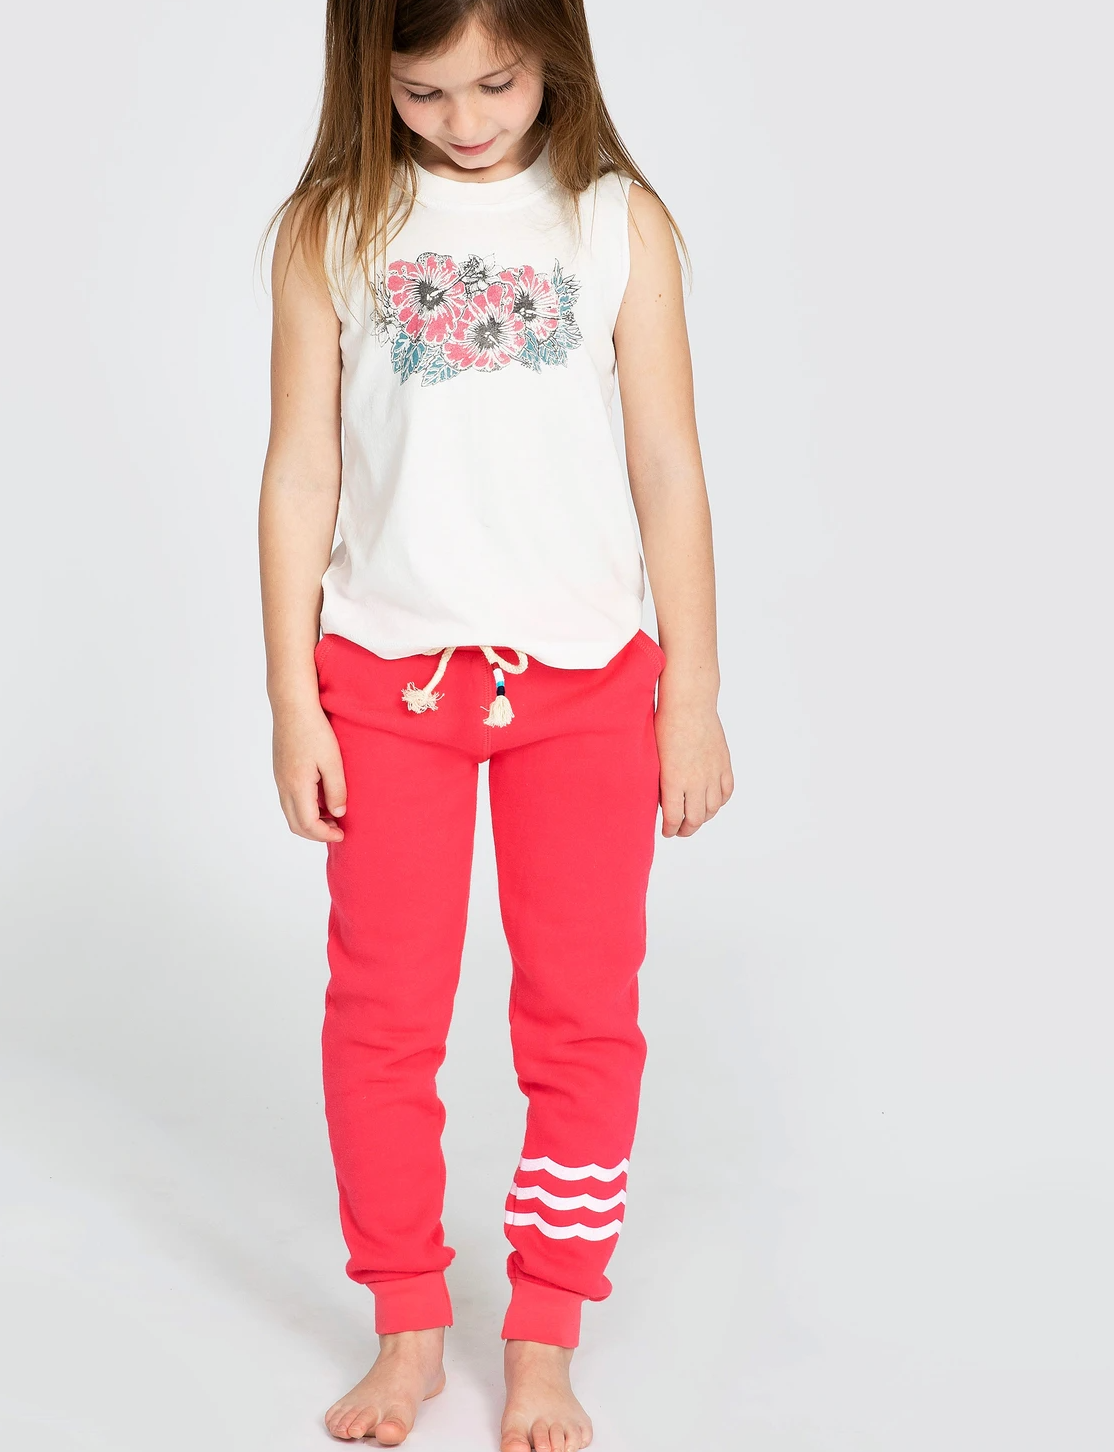 SOL ANGELES KIDS HIBISCUS MUSCLE TANK